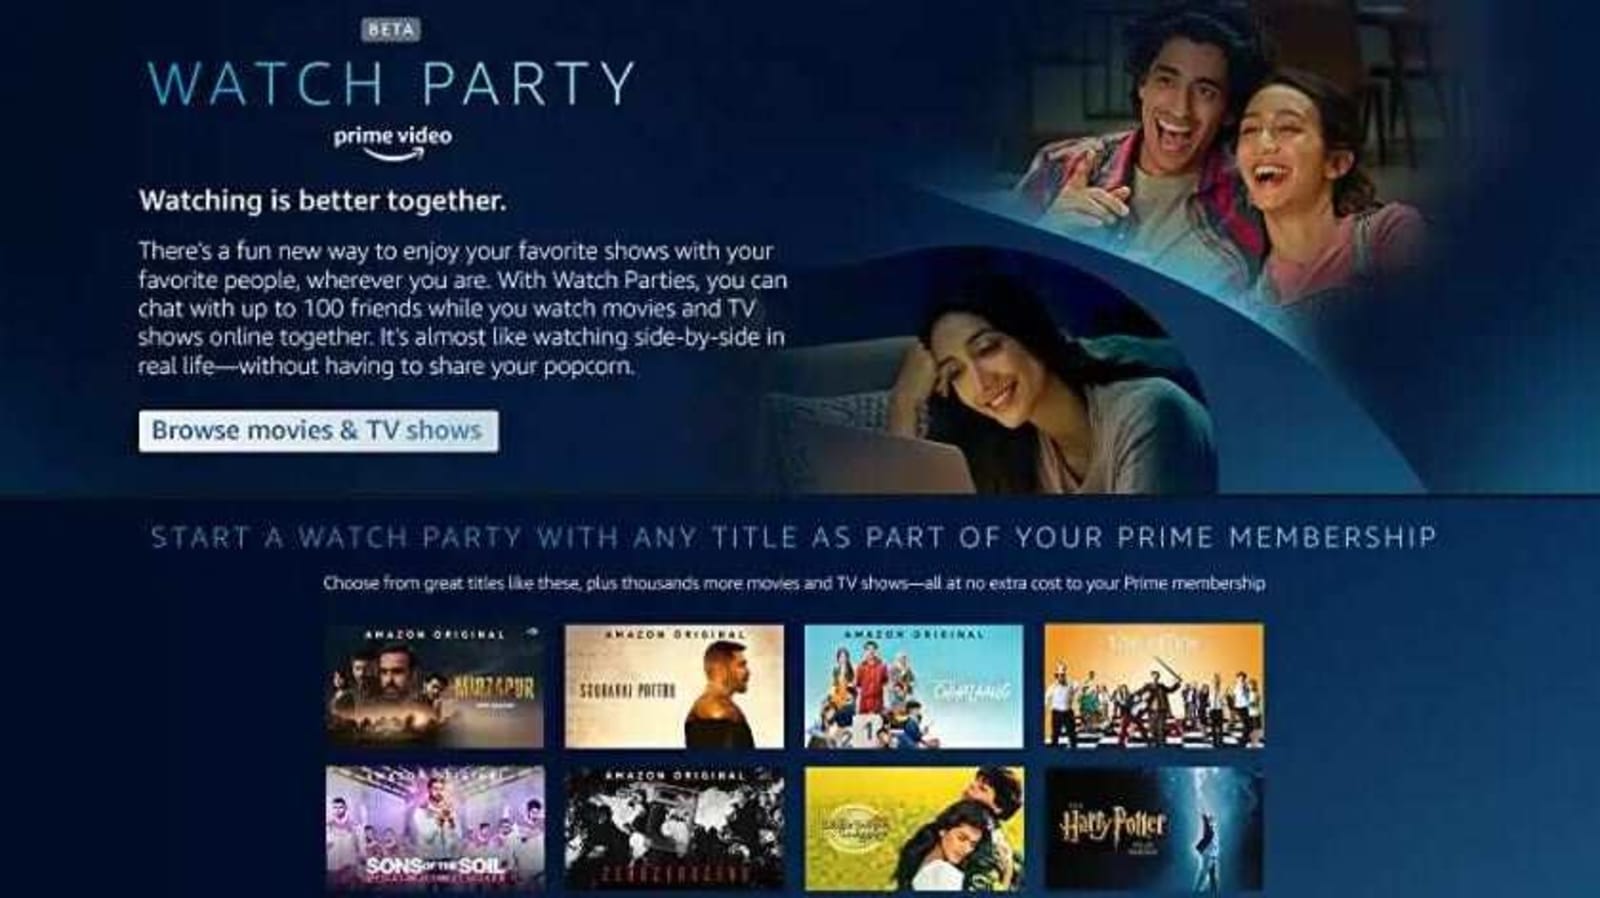 Watch Party: Here's how to watch movies, shows with